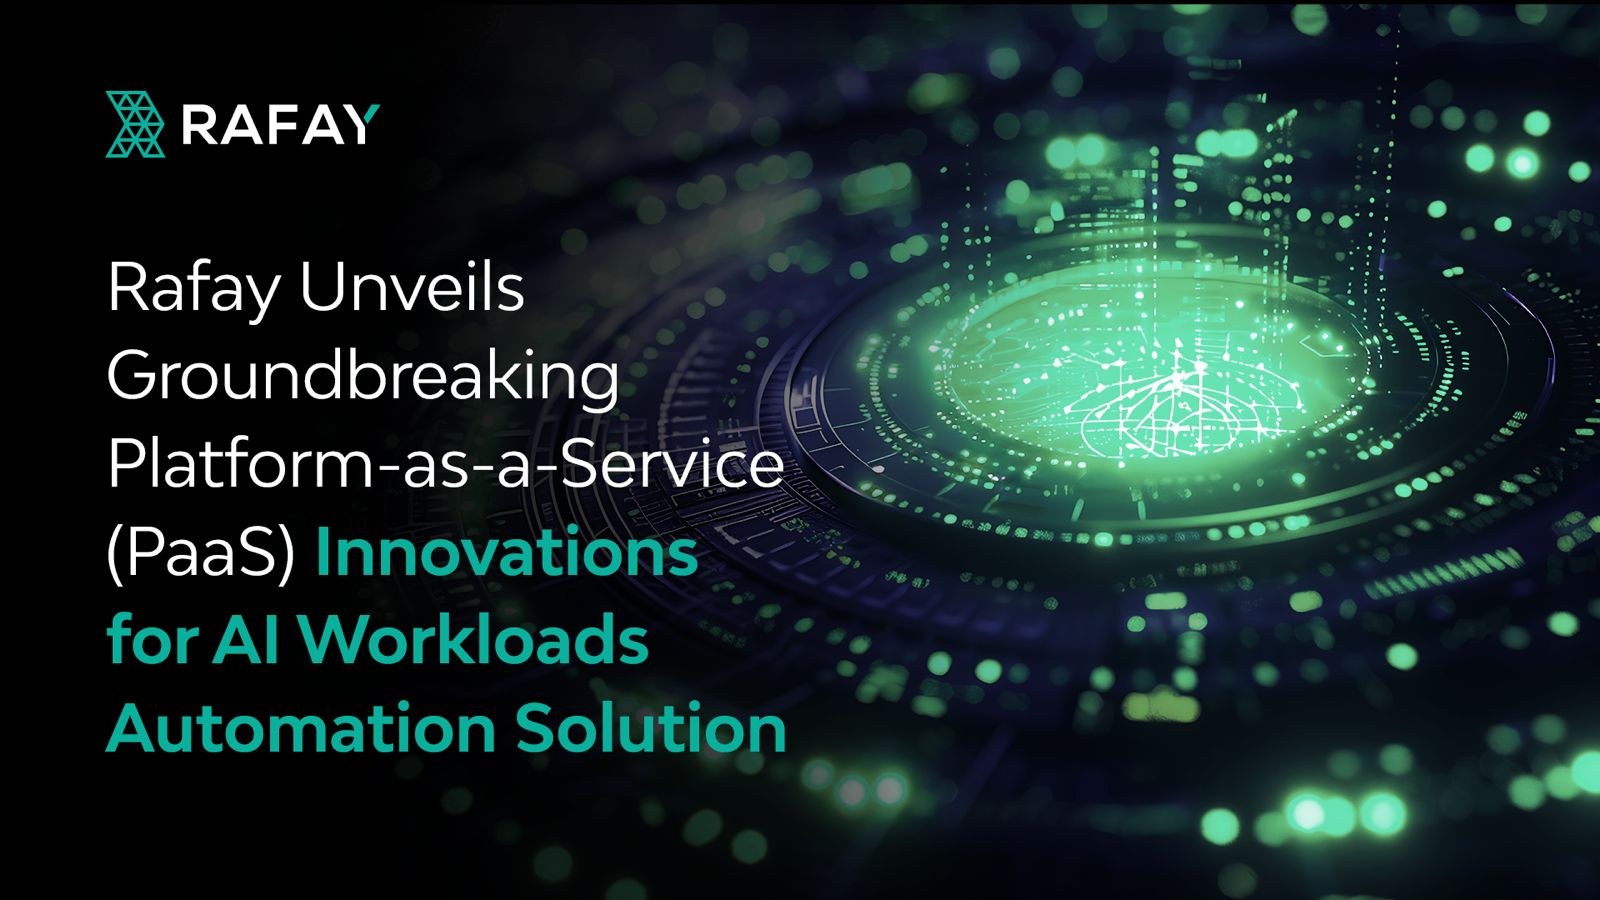 Image for Rafay Unveils Groundbreaking Platform-as-a-Service (PaaS) Innovations for AI Workloads